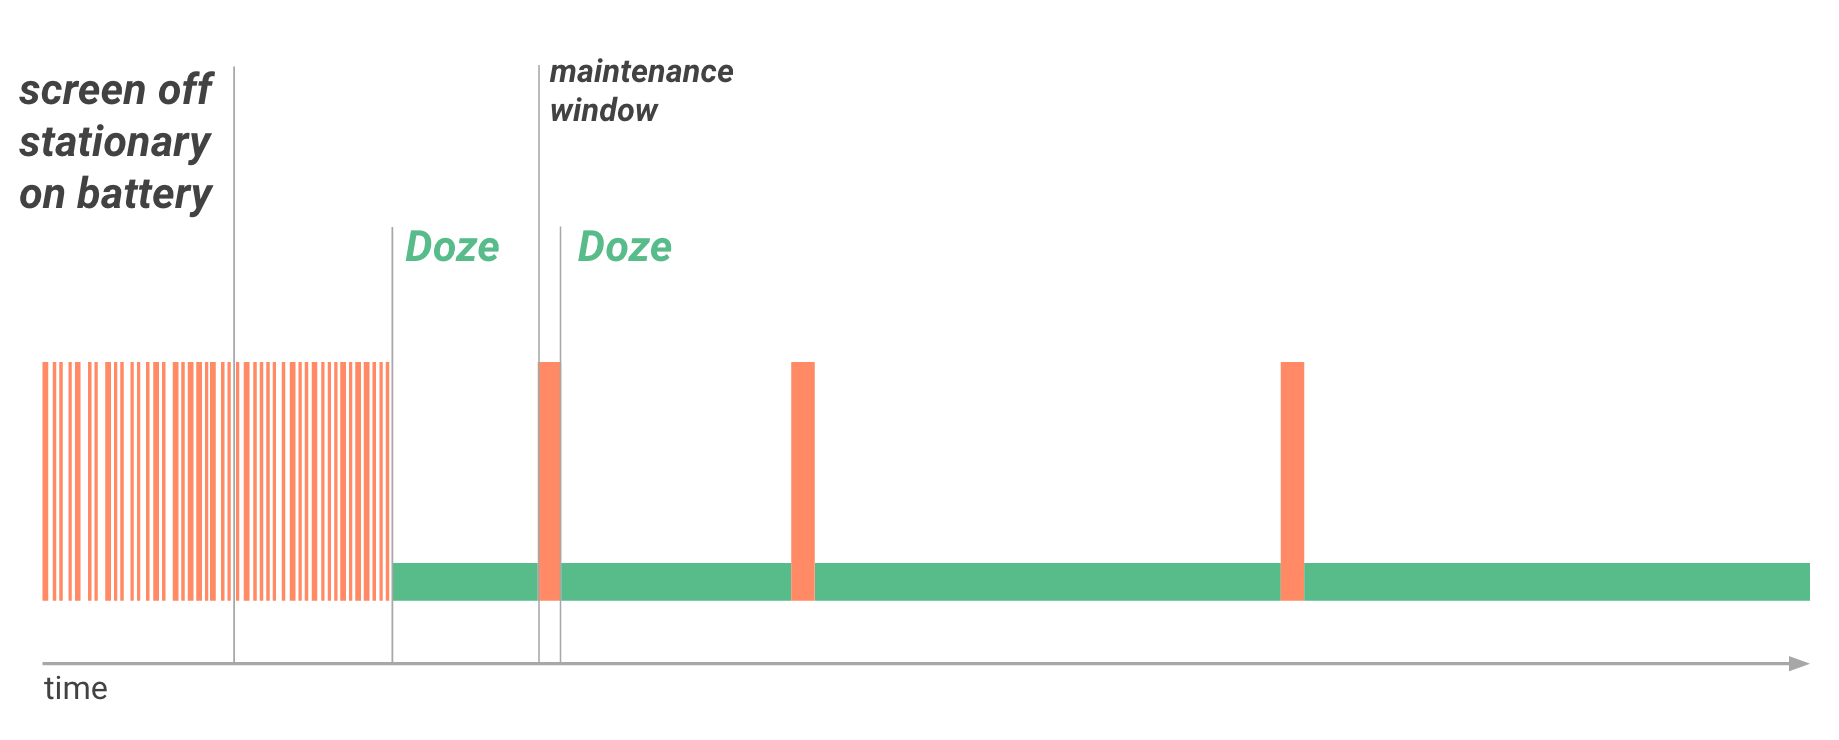 Doze provides a recurring maintenance window for apps to use the network and handle pending activities